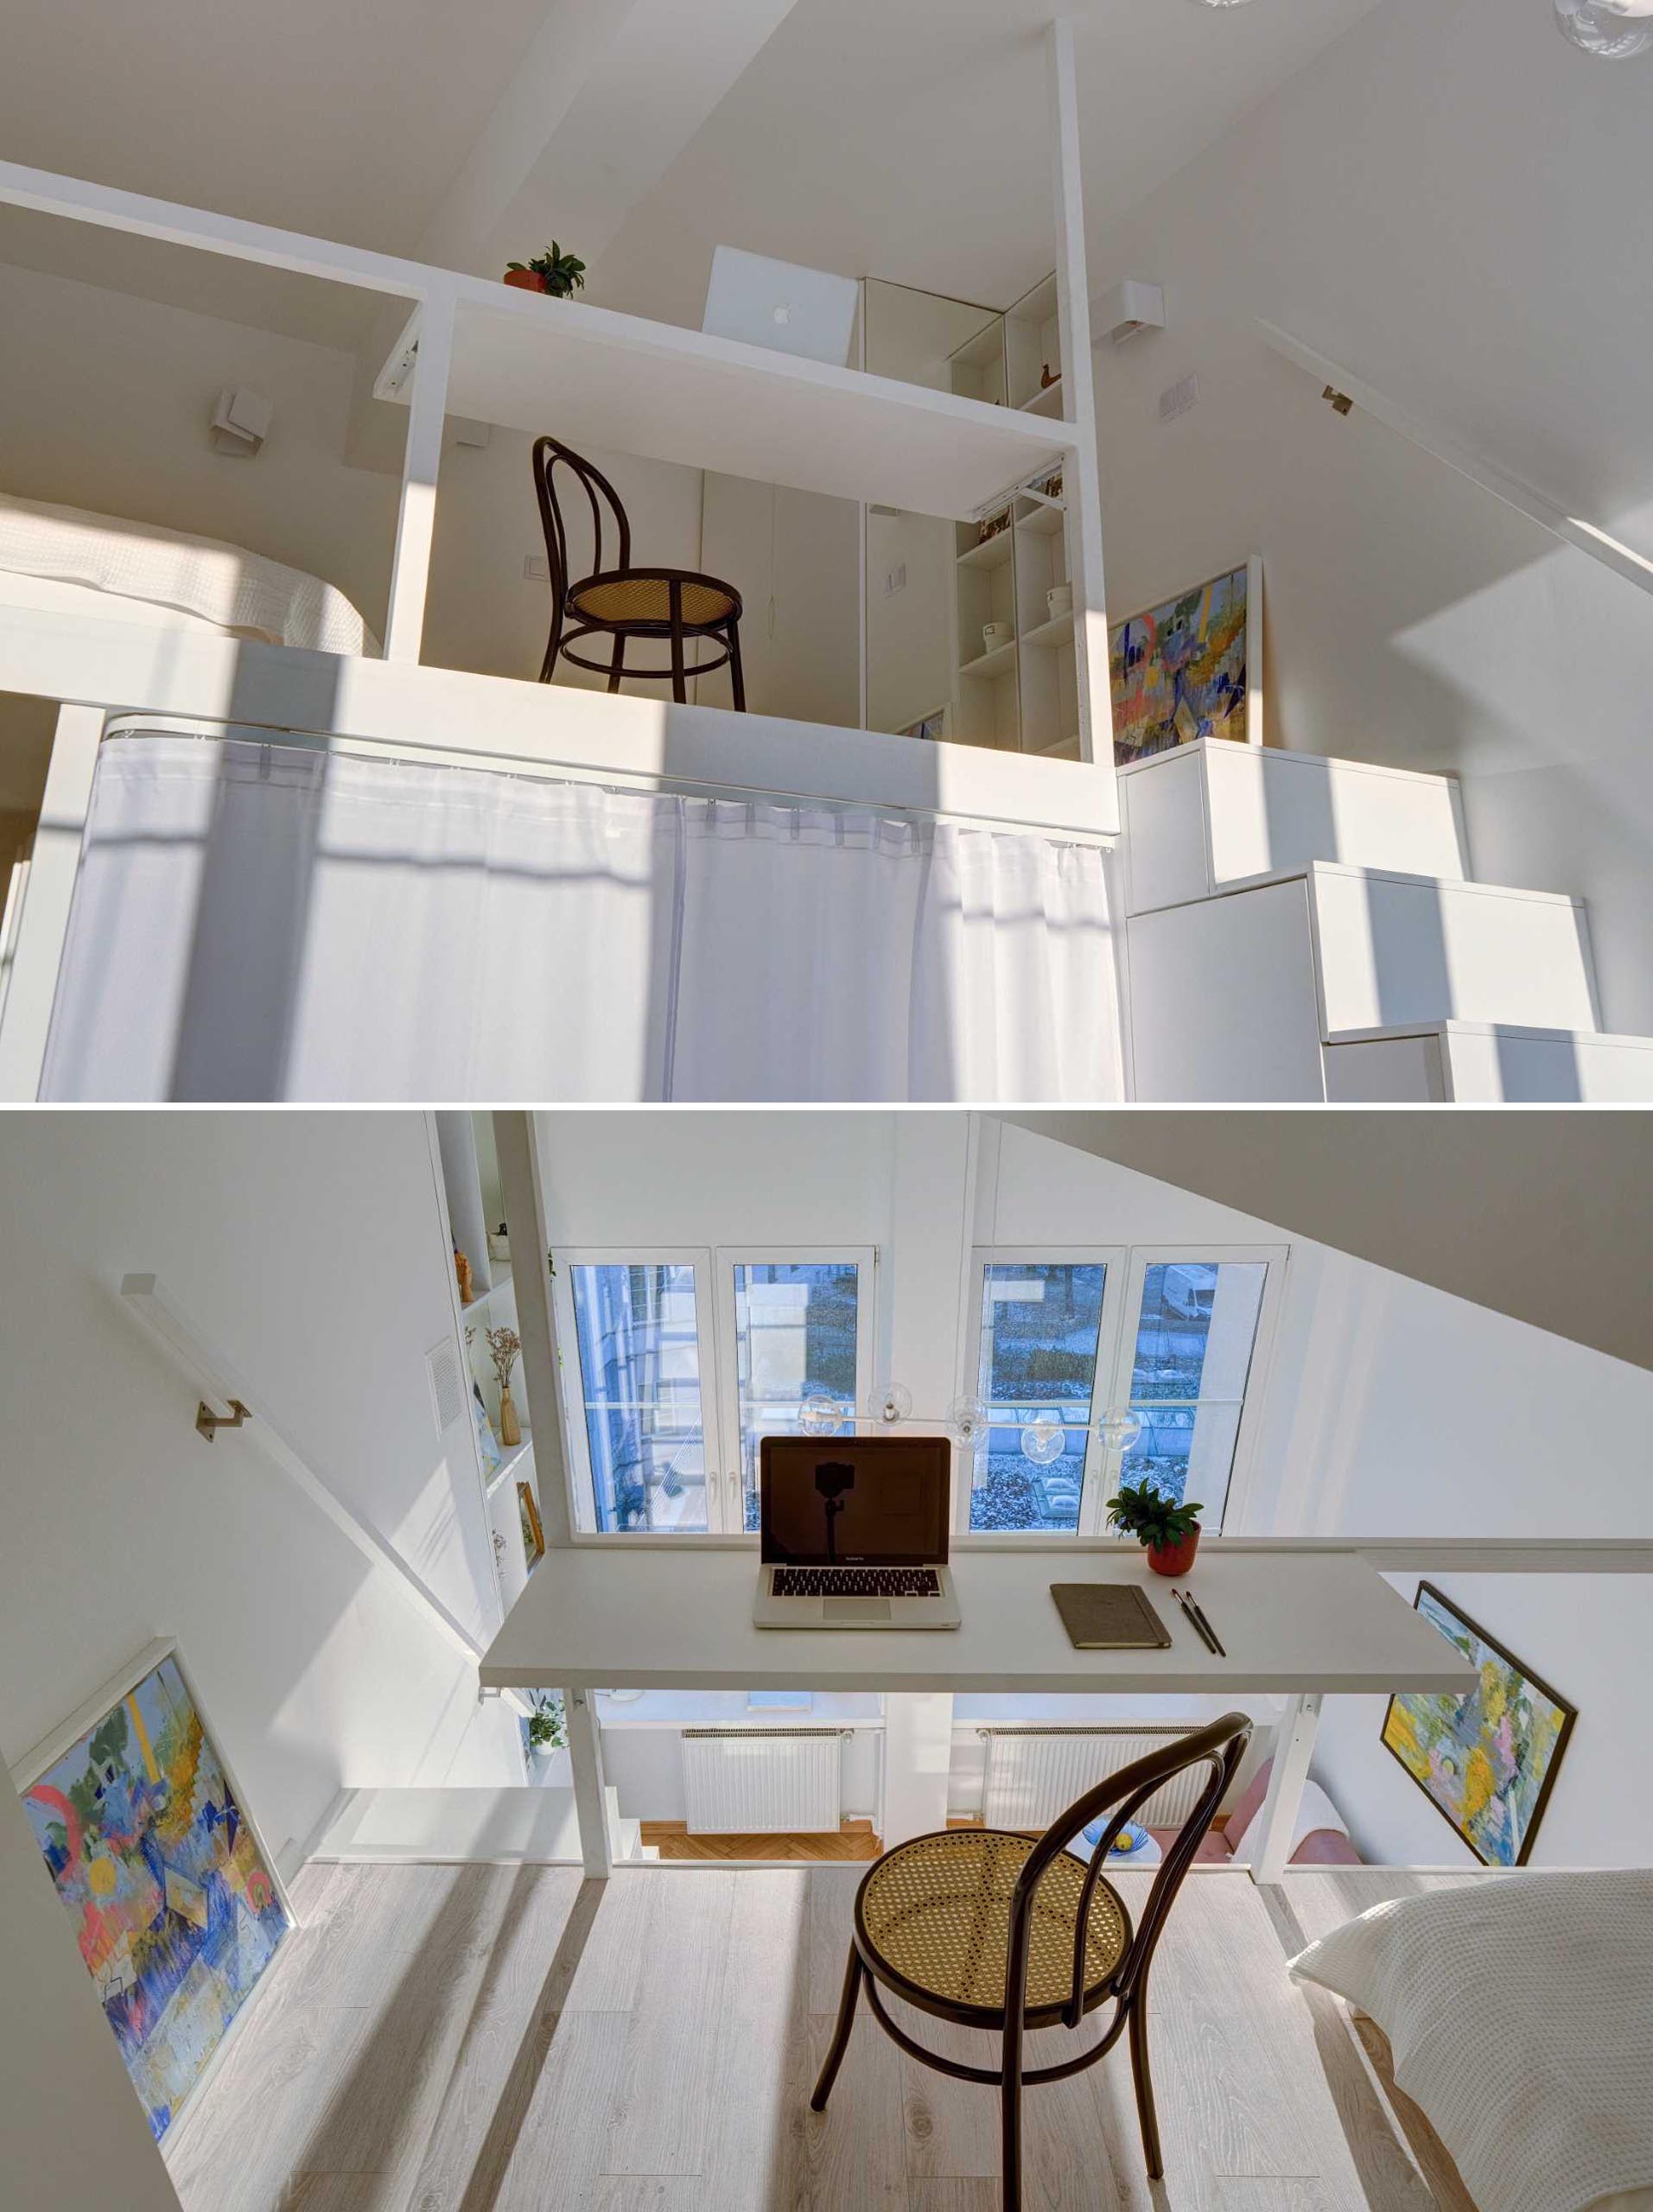 In the loft at the top of the stairs, there's a built-in desk that uses the railing for support.